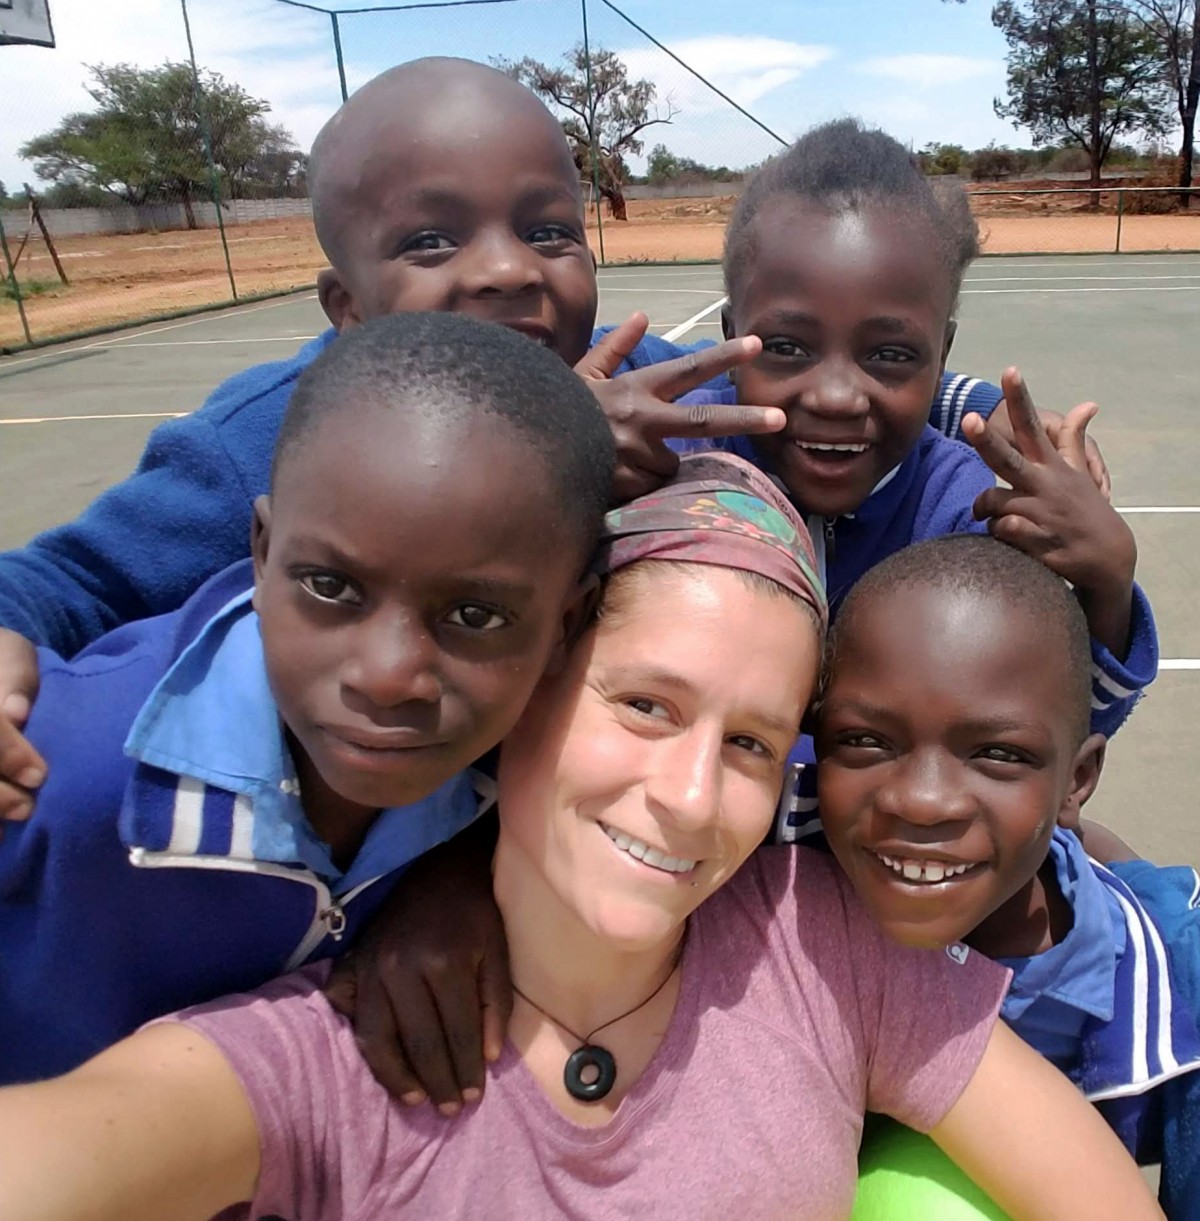 A photo taken during Jessica's capstone project in Zimbabwe.